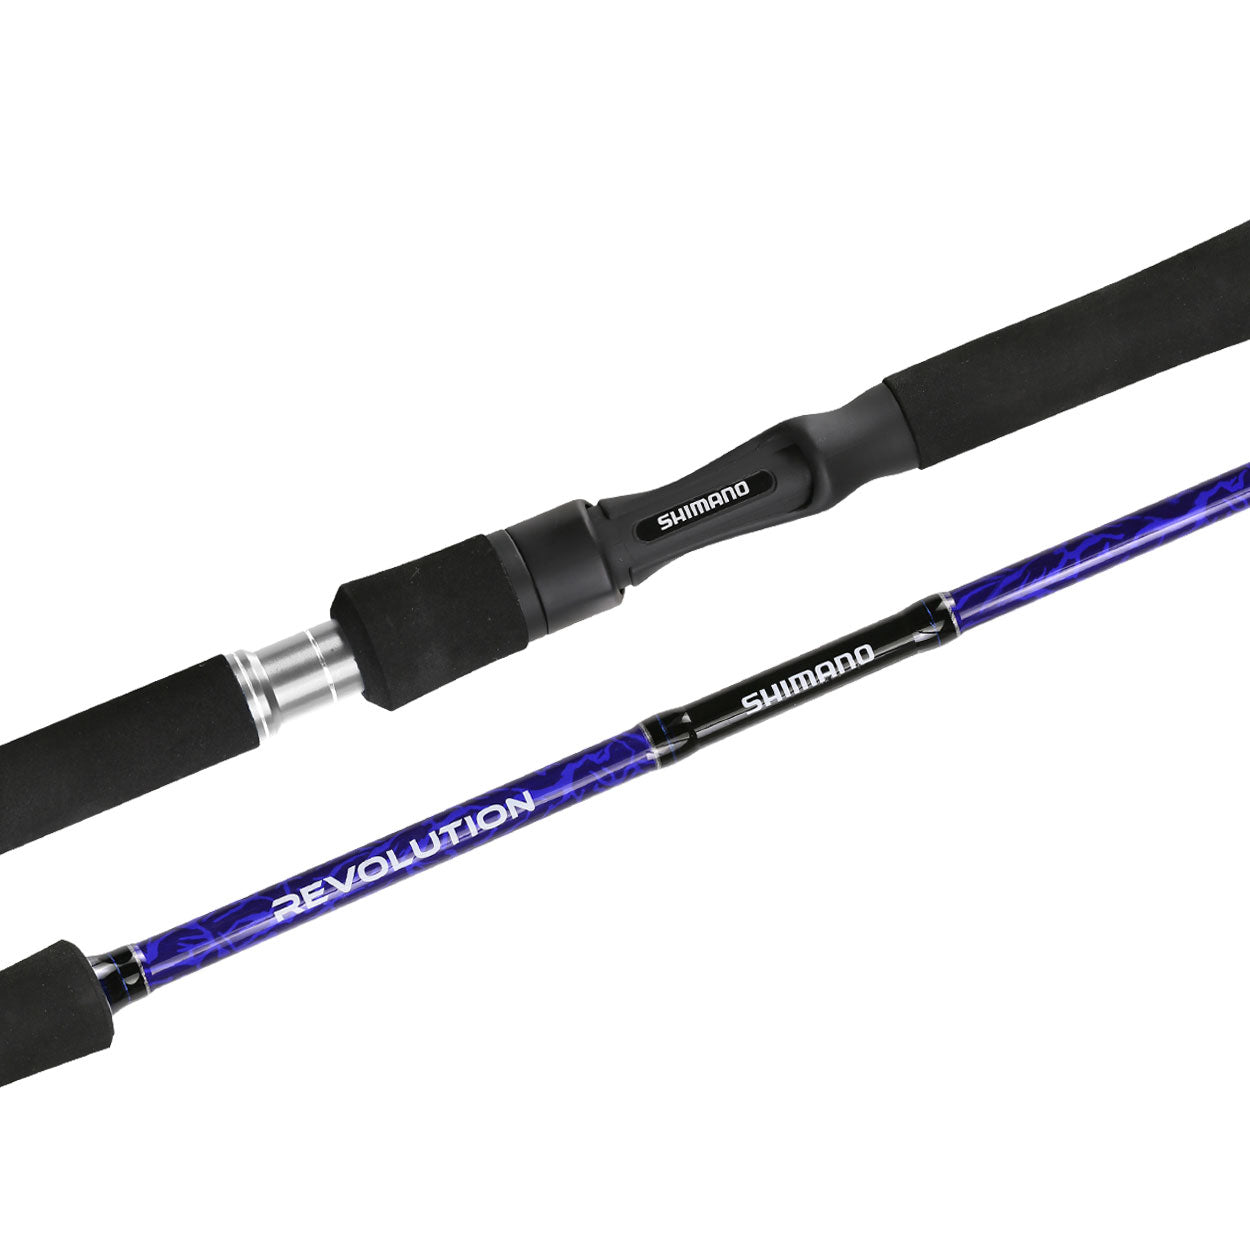 Shimano Fishing Rods Tagged retailer - Fergo's Tackle World